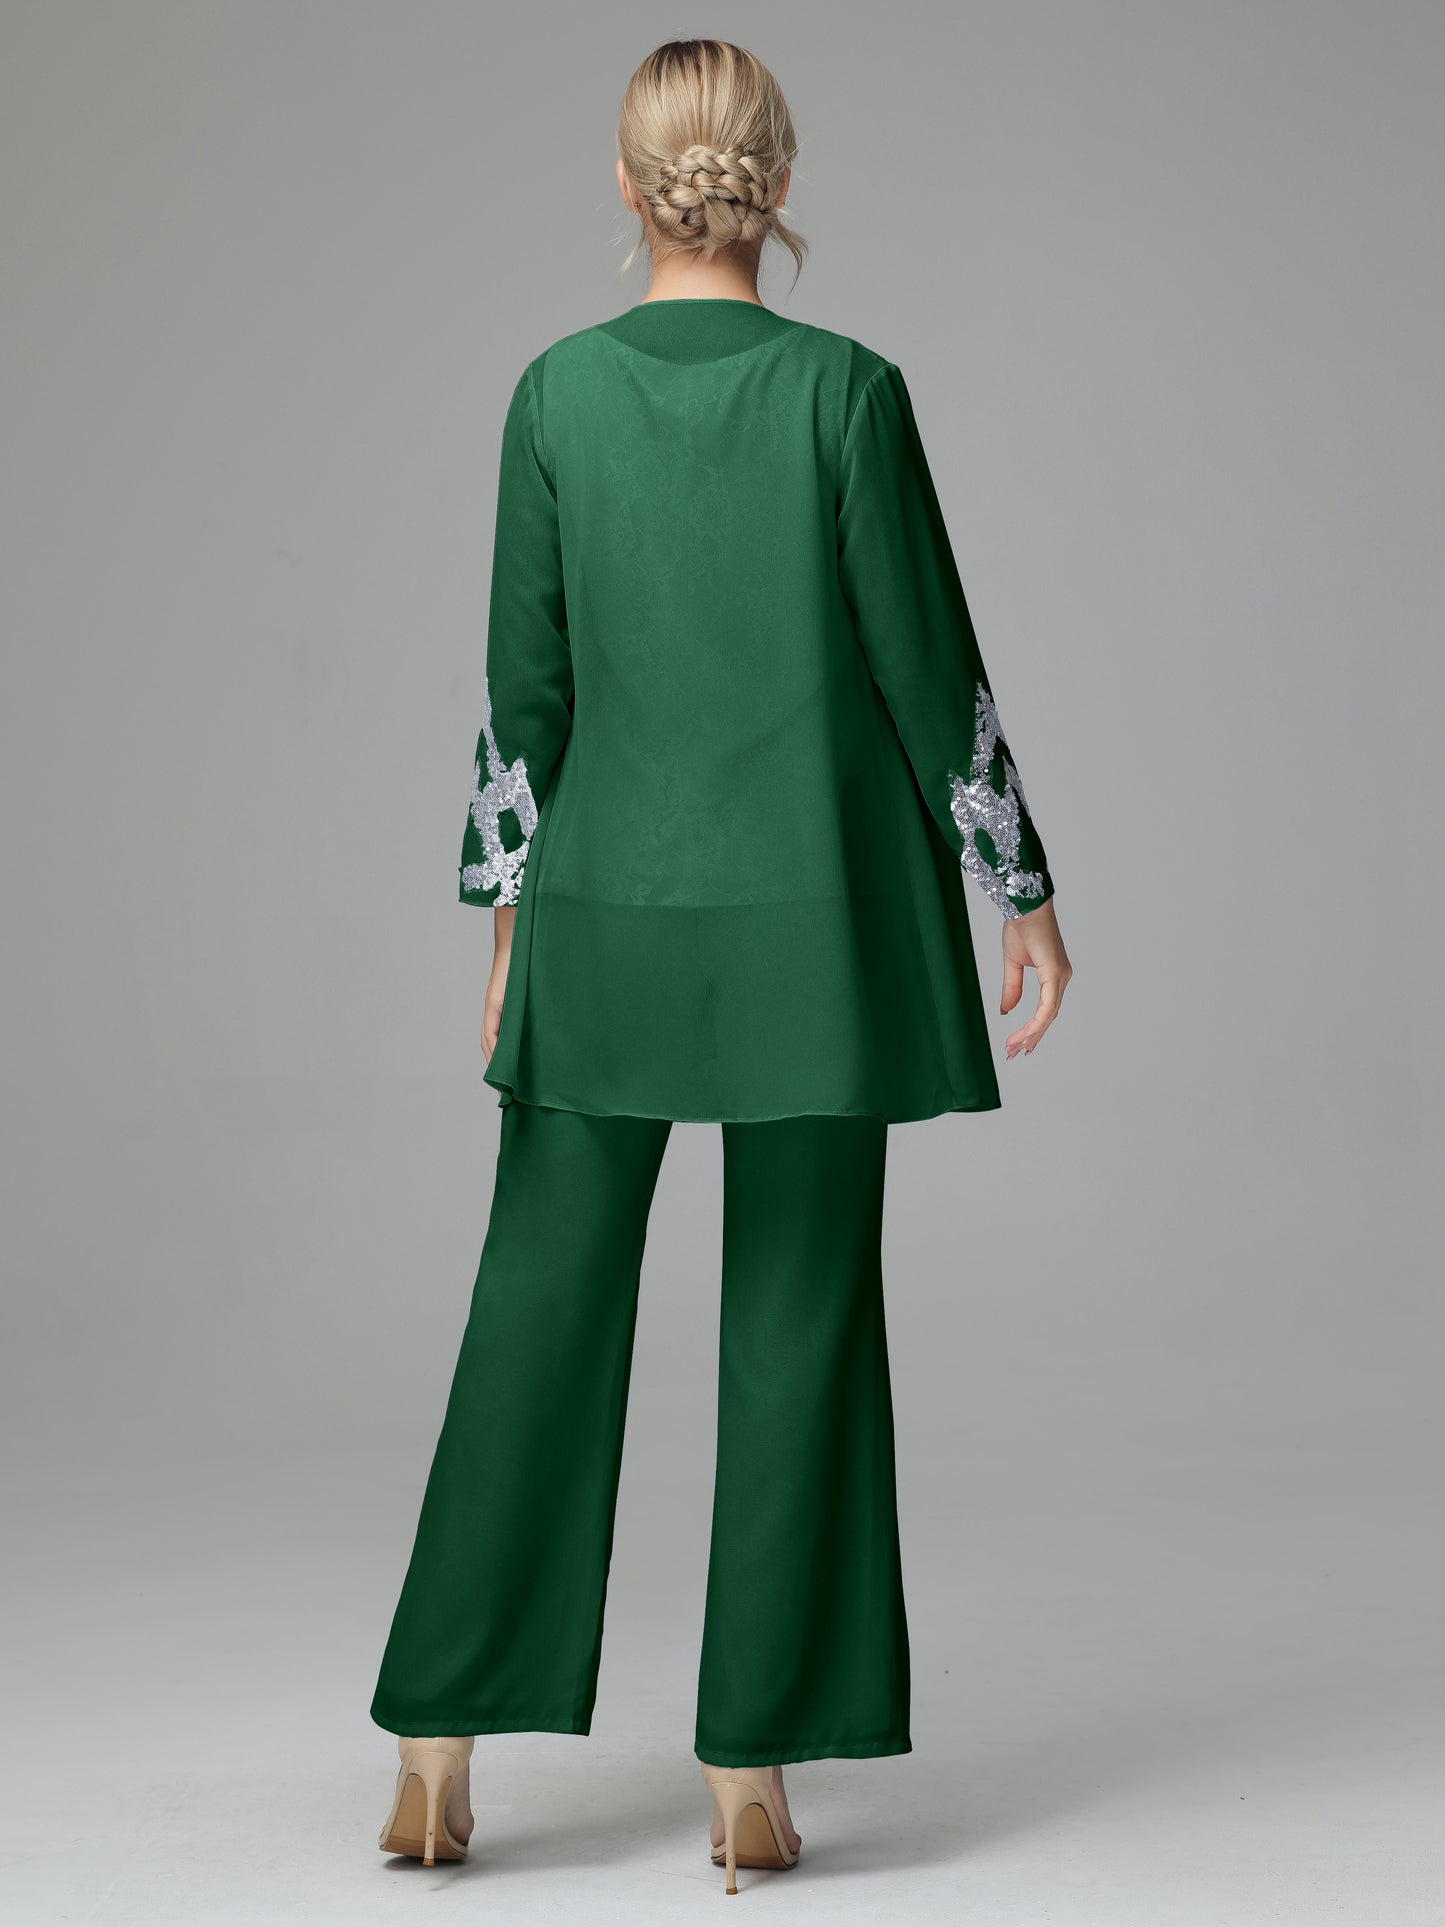 Chiffon 3 Pieces Mother of the Bride Dress Pant Suits With Appliques